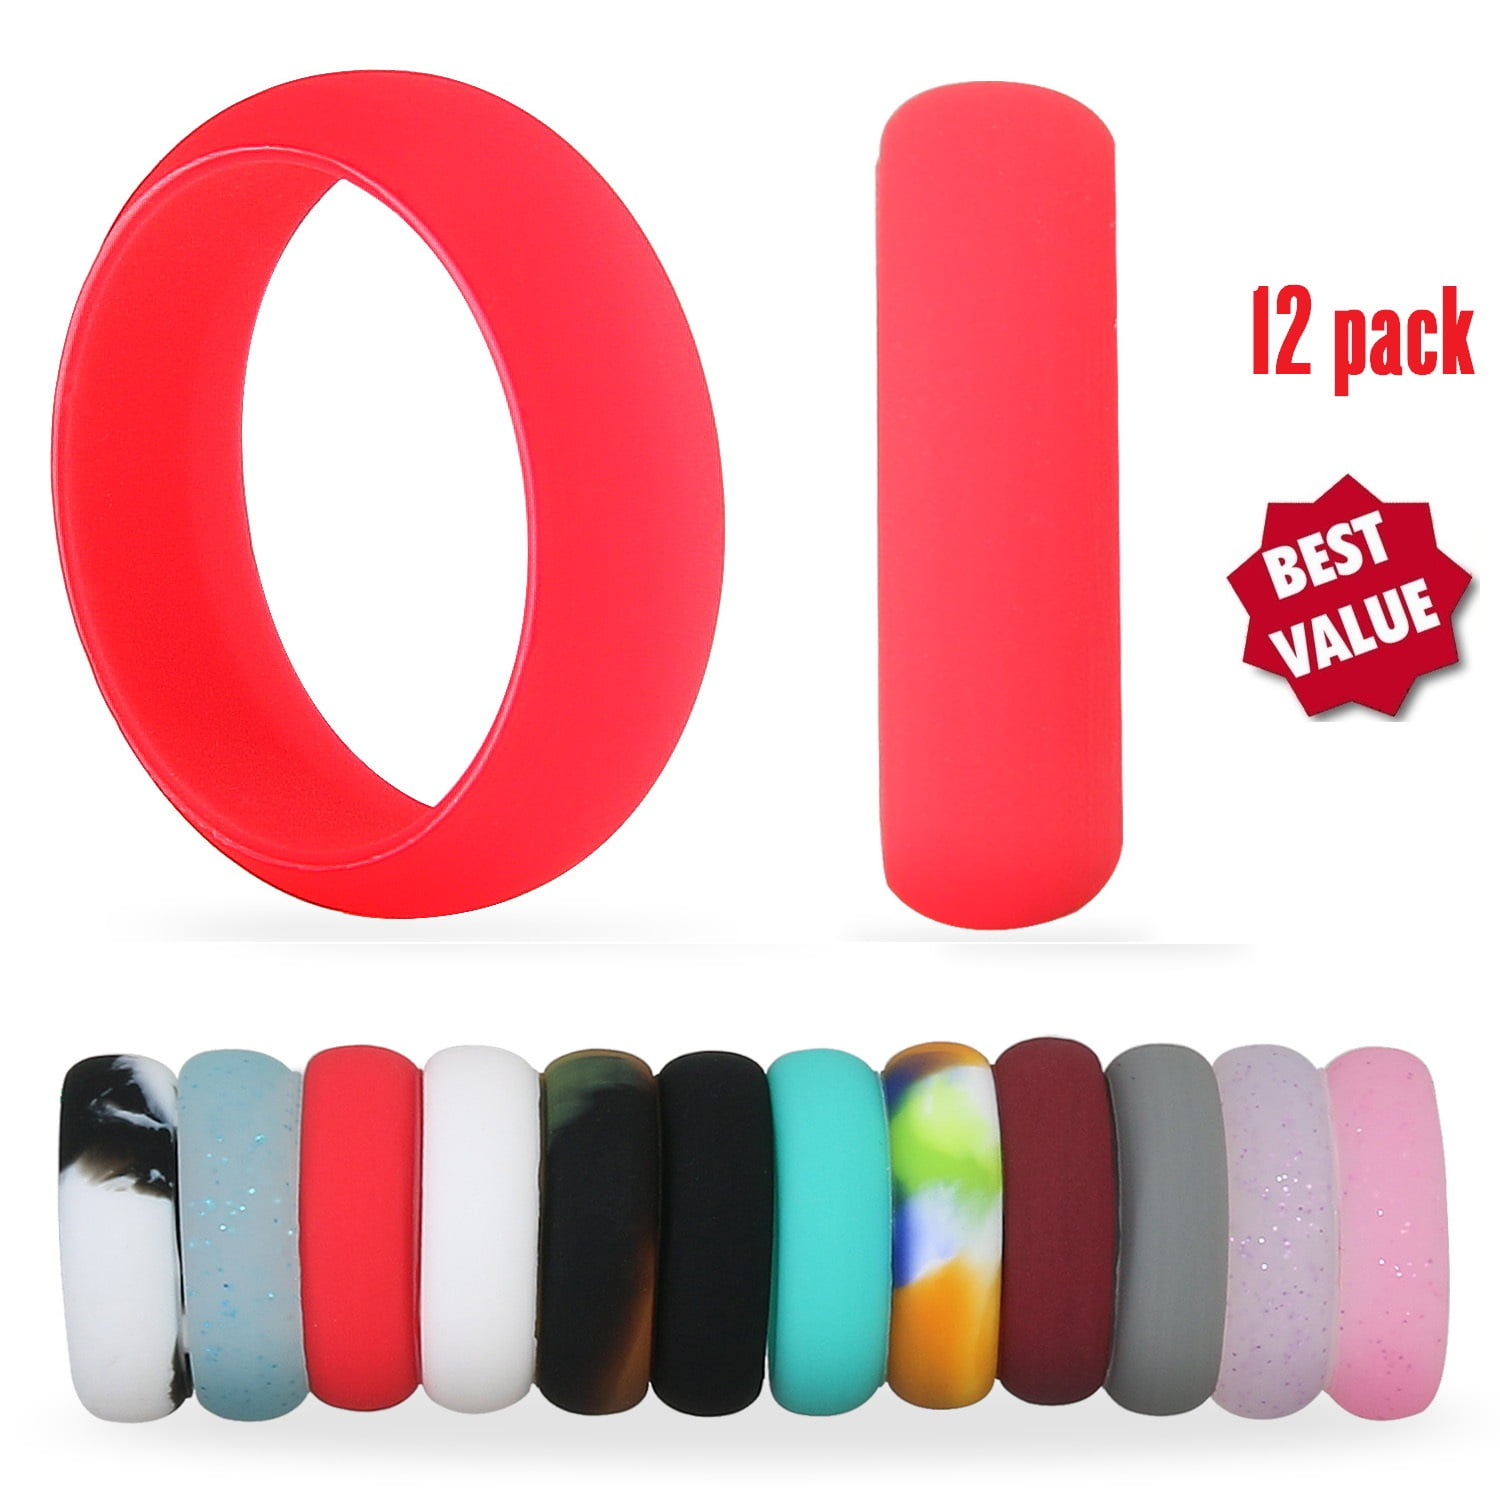 10PCS Silicone Rubber Wedding Engagement Ring Band Mens Outdoor Sports Size 9-12 